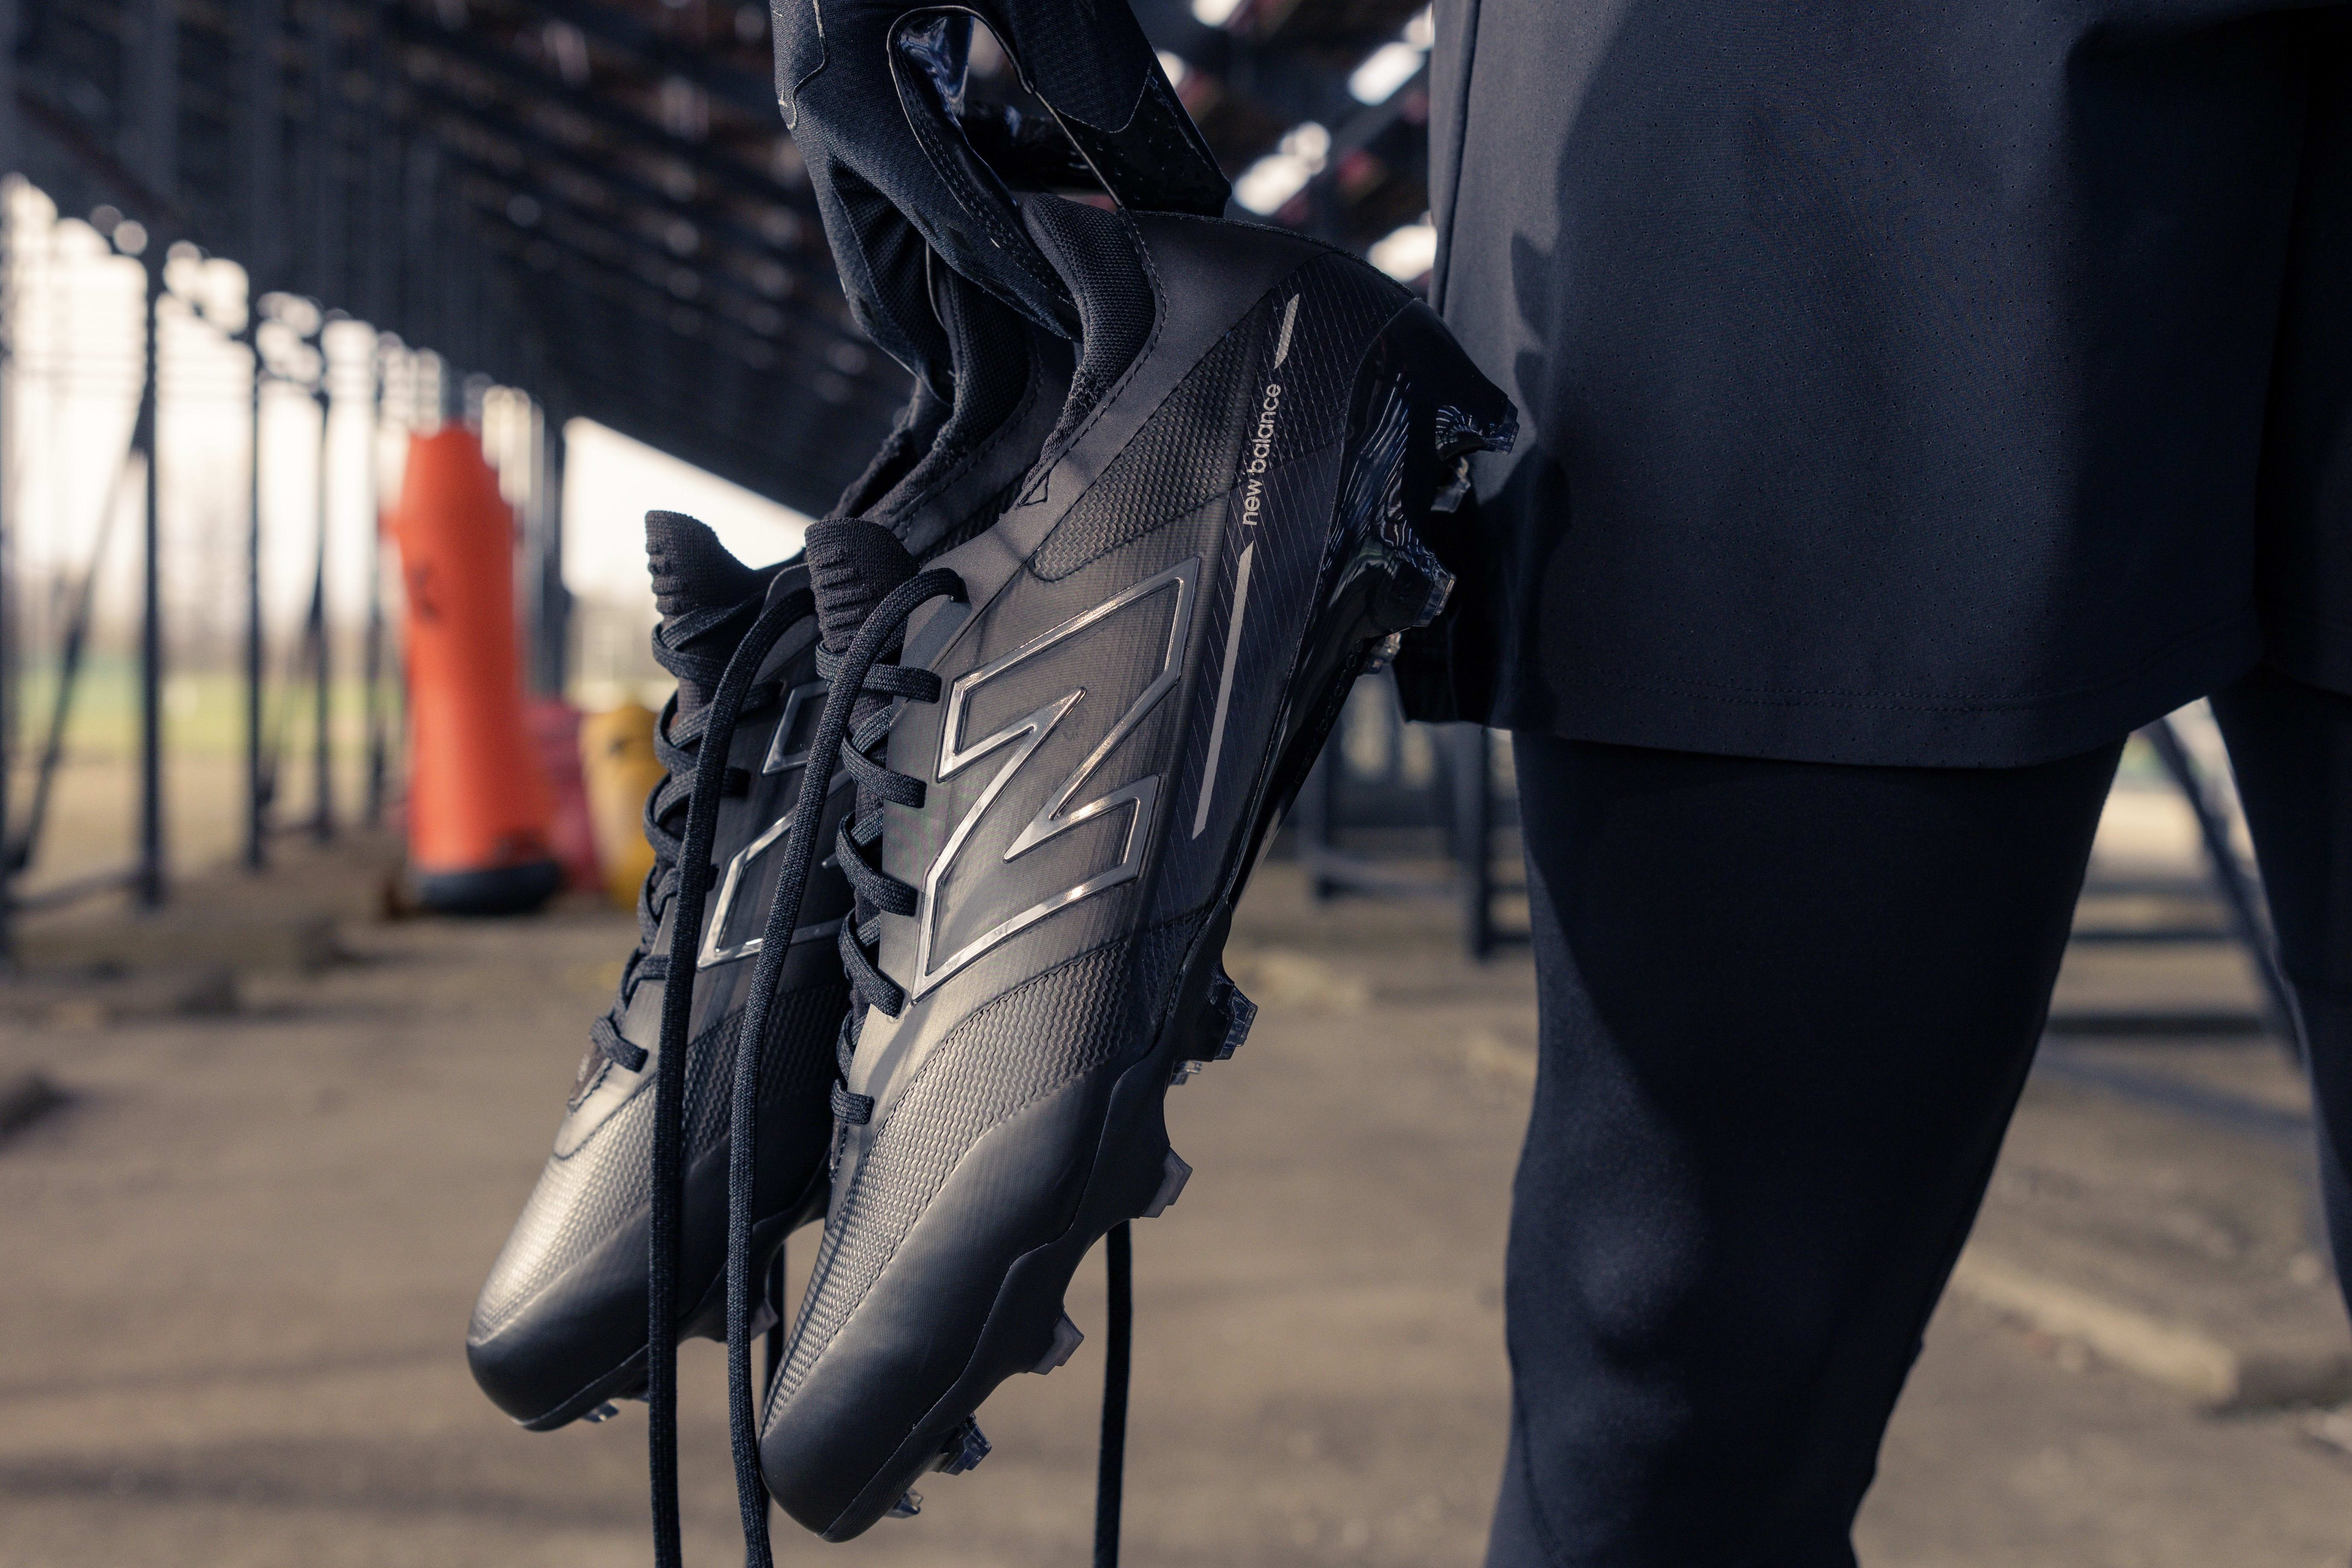 Side view of black New Balance football cleats.